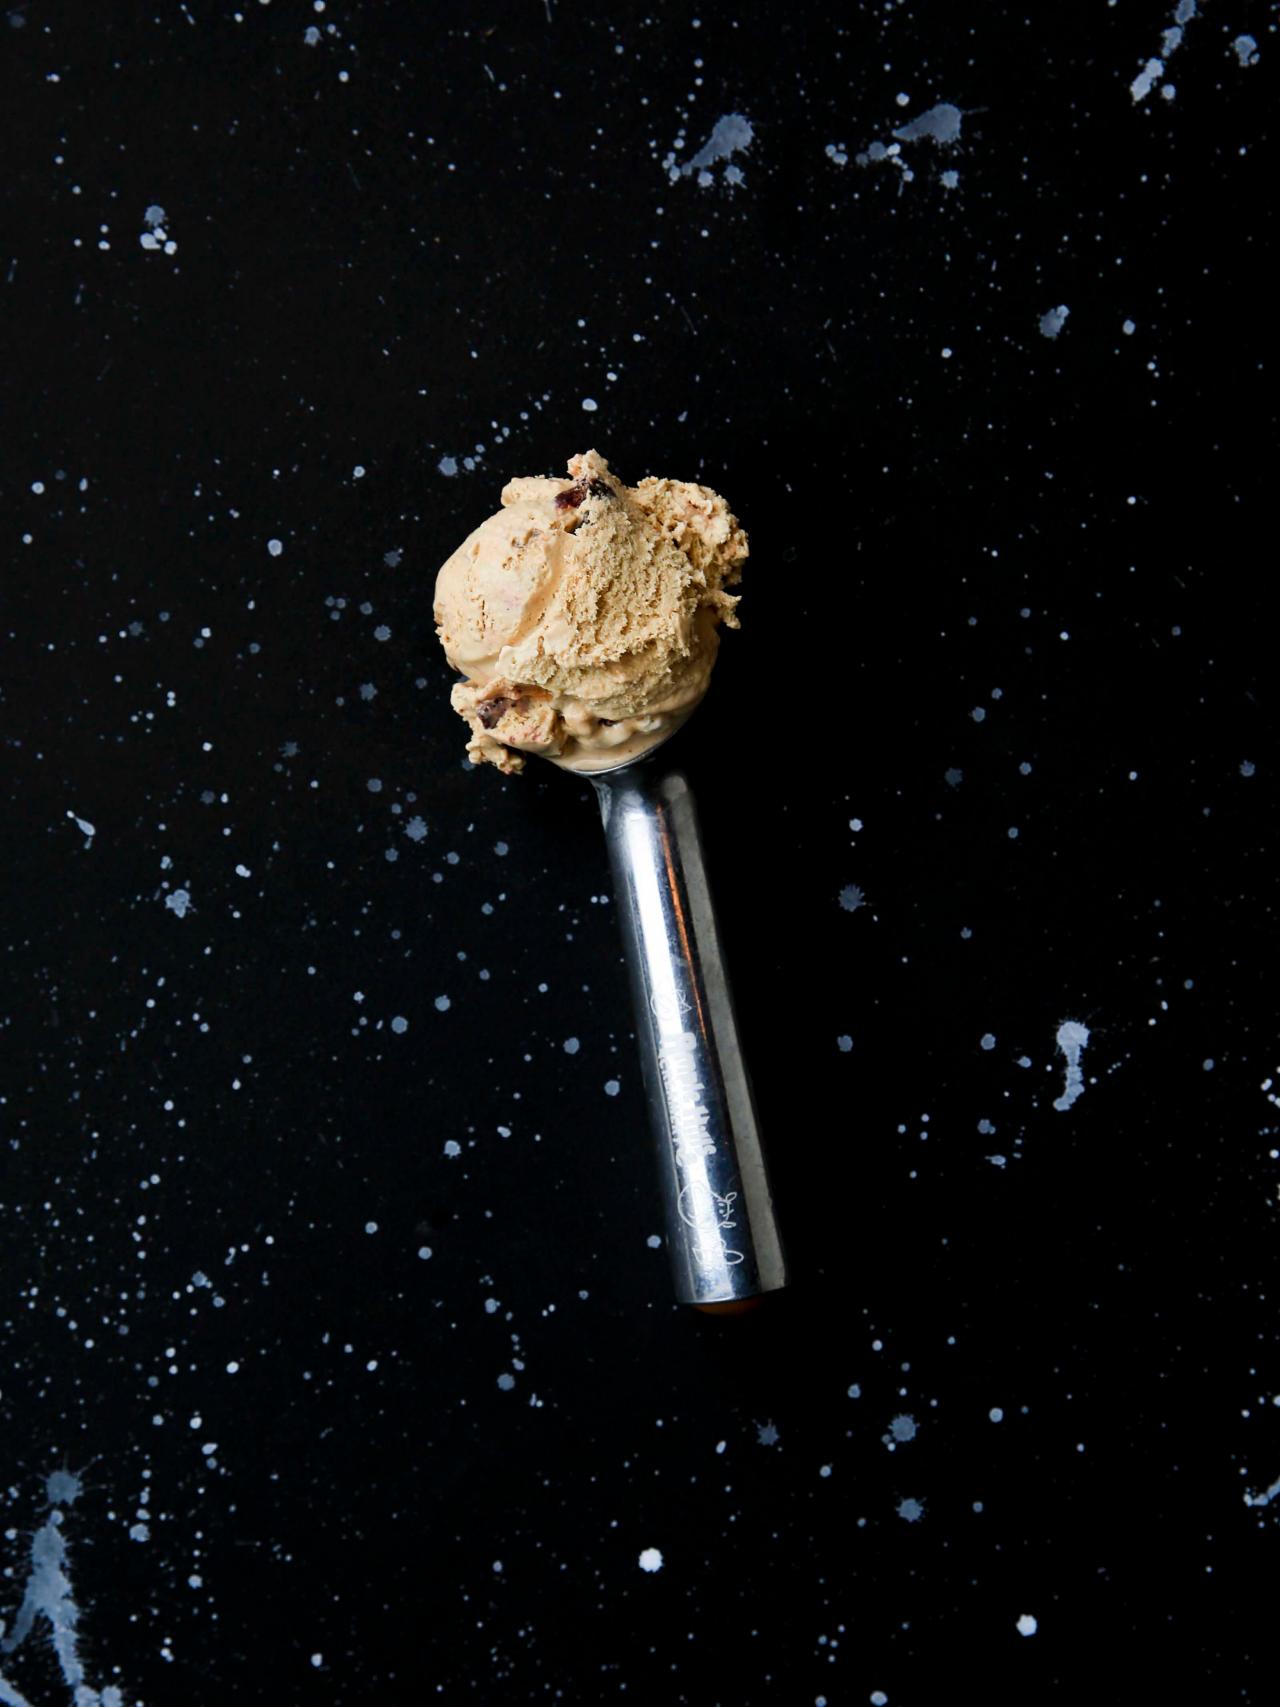 3 New Star Wars-Inspired Ice Creams Are Hitting Stores Today | FN Dish ...